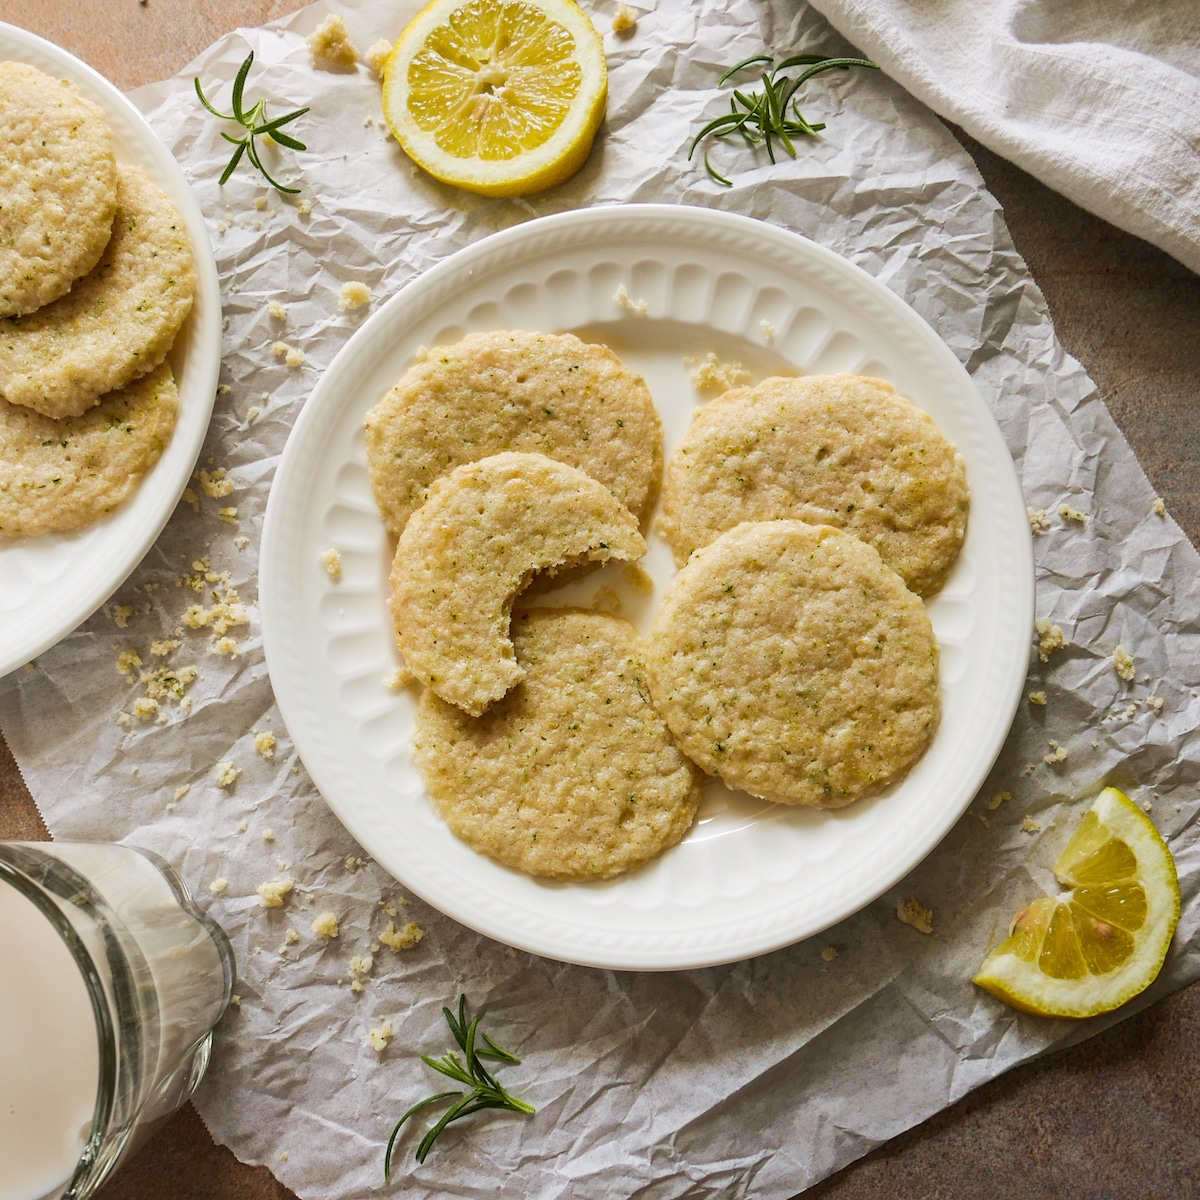 Plate of shortbread cookies surrounded by cookie crumbs, lemon slices, and rosemary sprigs. 